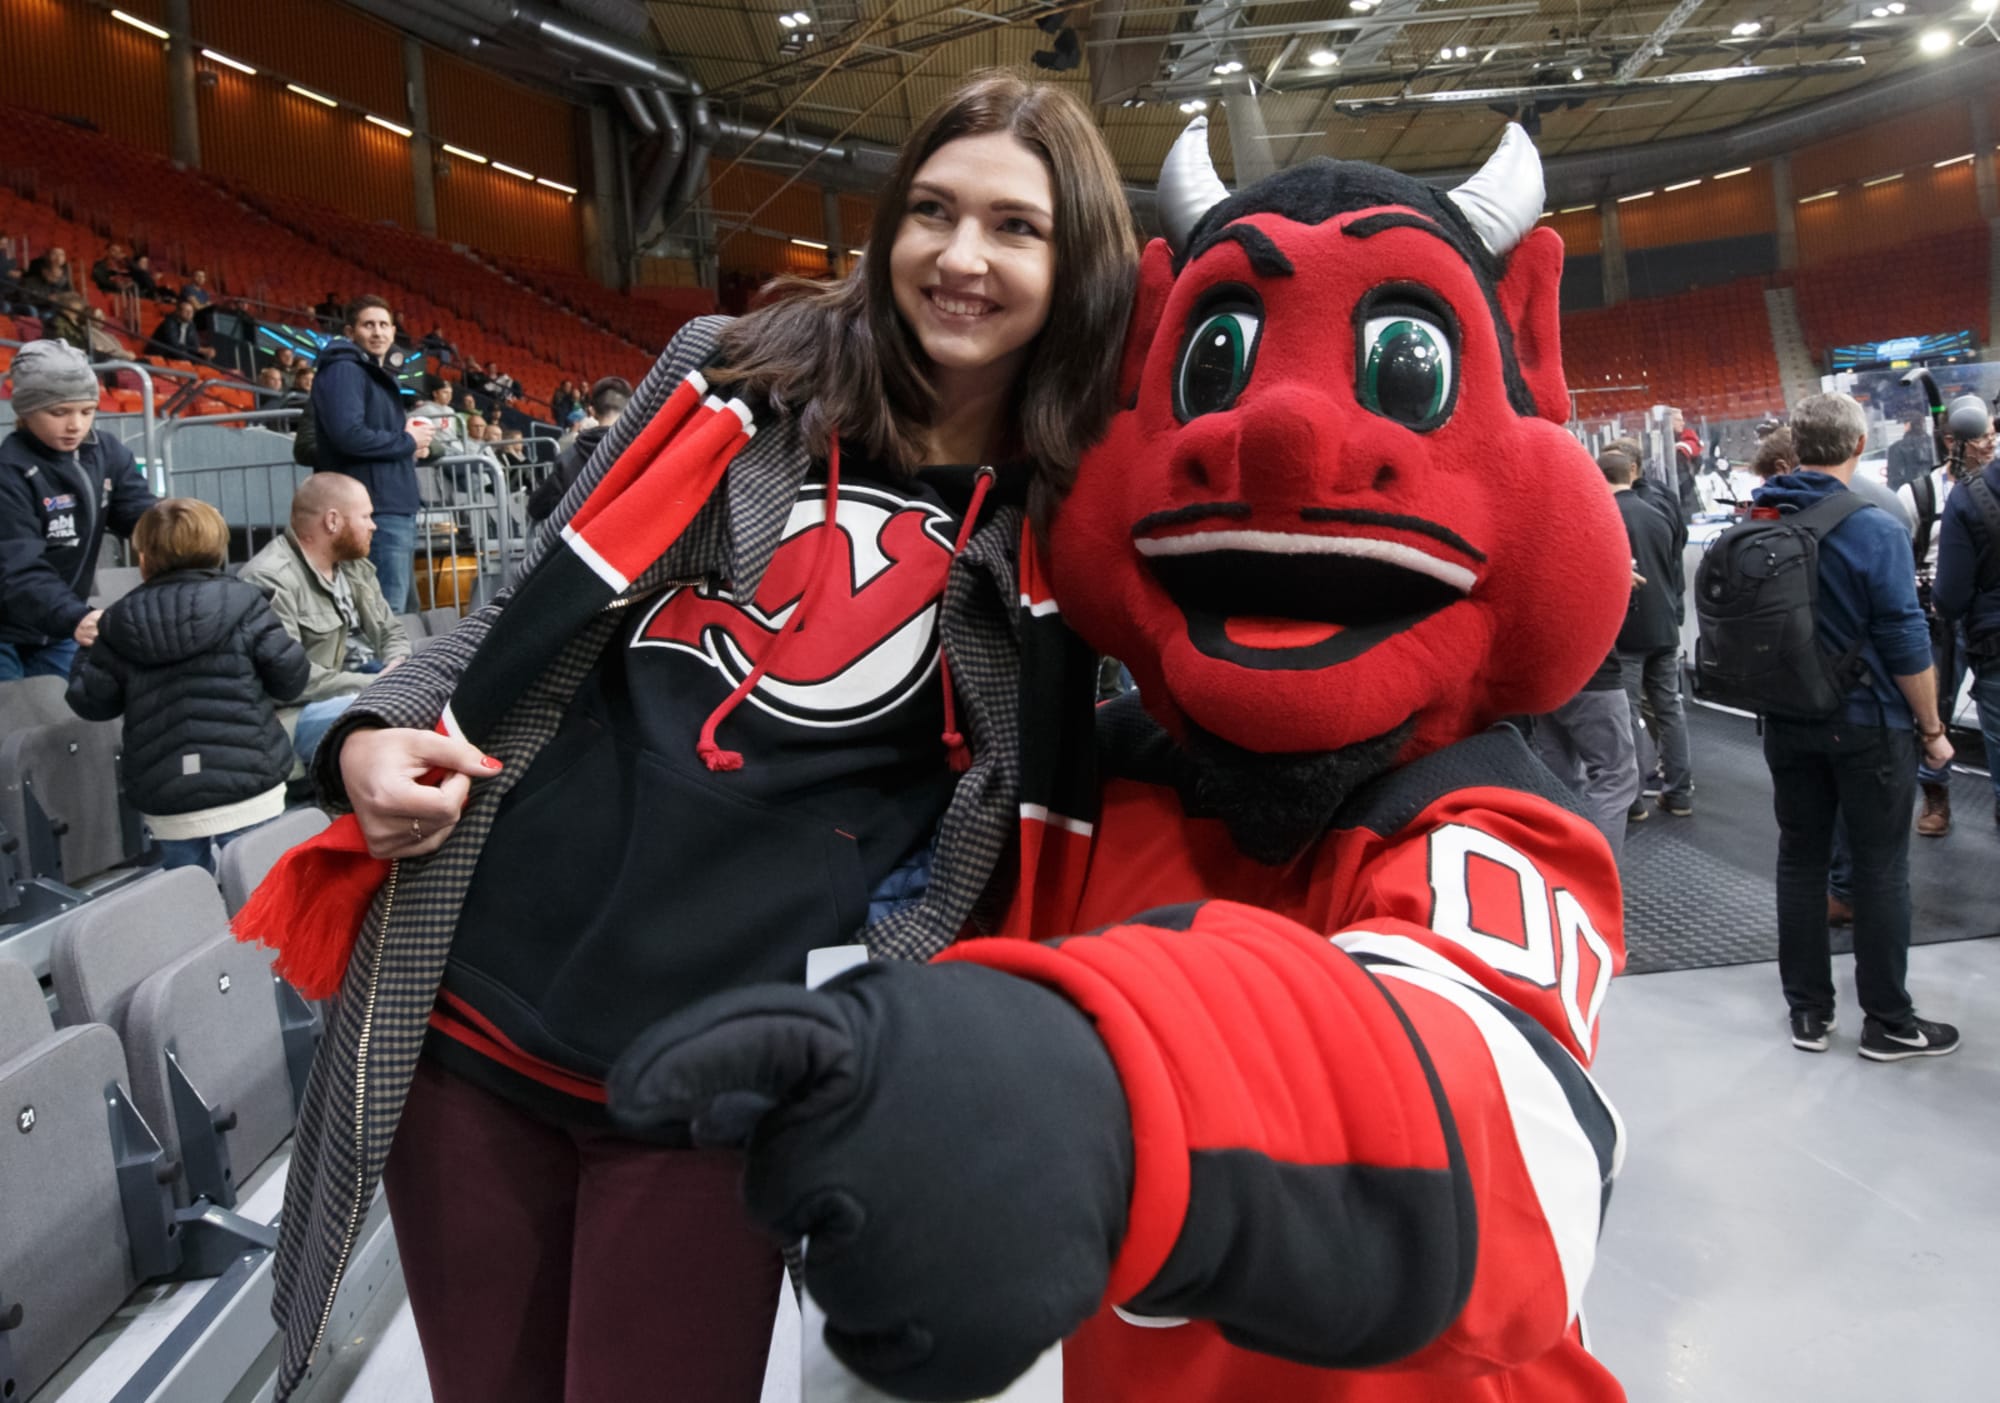 NJ Devils say NY Rangers fans should feel welcome and “safe” at